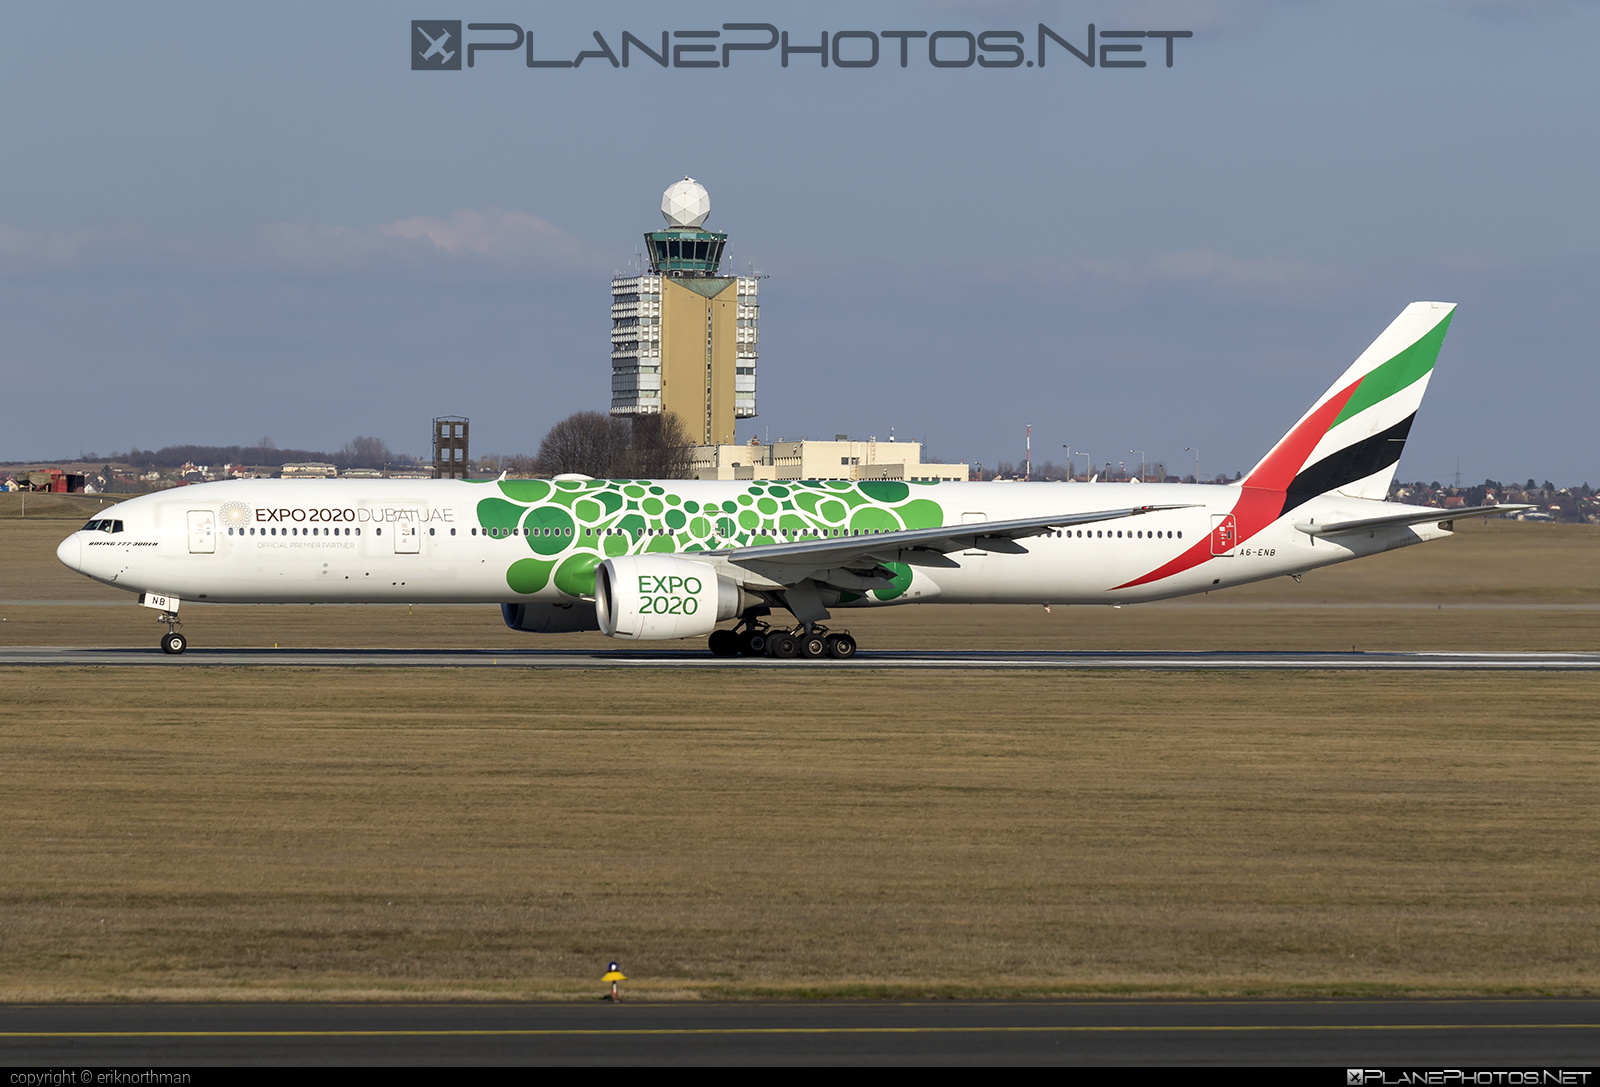 Boeing 777-300ER - A6-ENB operated by Emirates #b777 #b777er #boeing #boeing777 #emirates #tripleseven